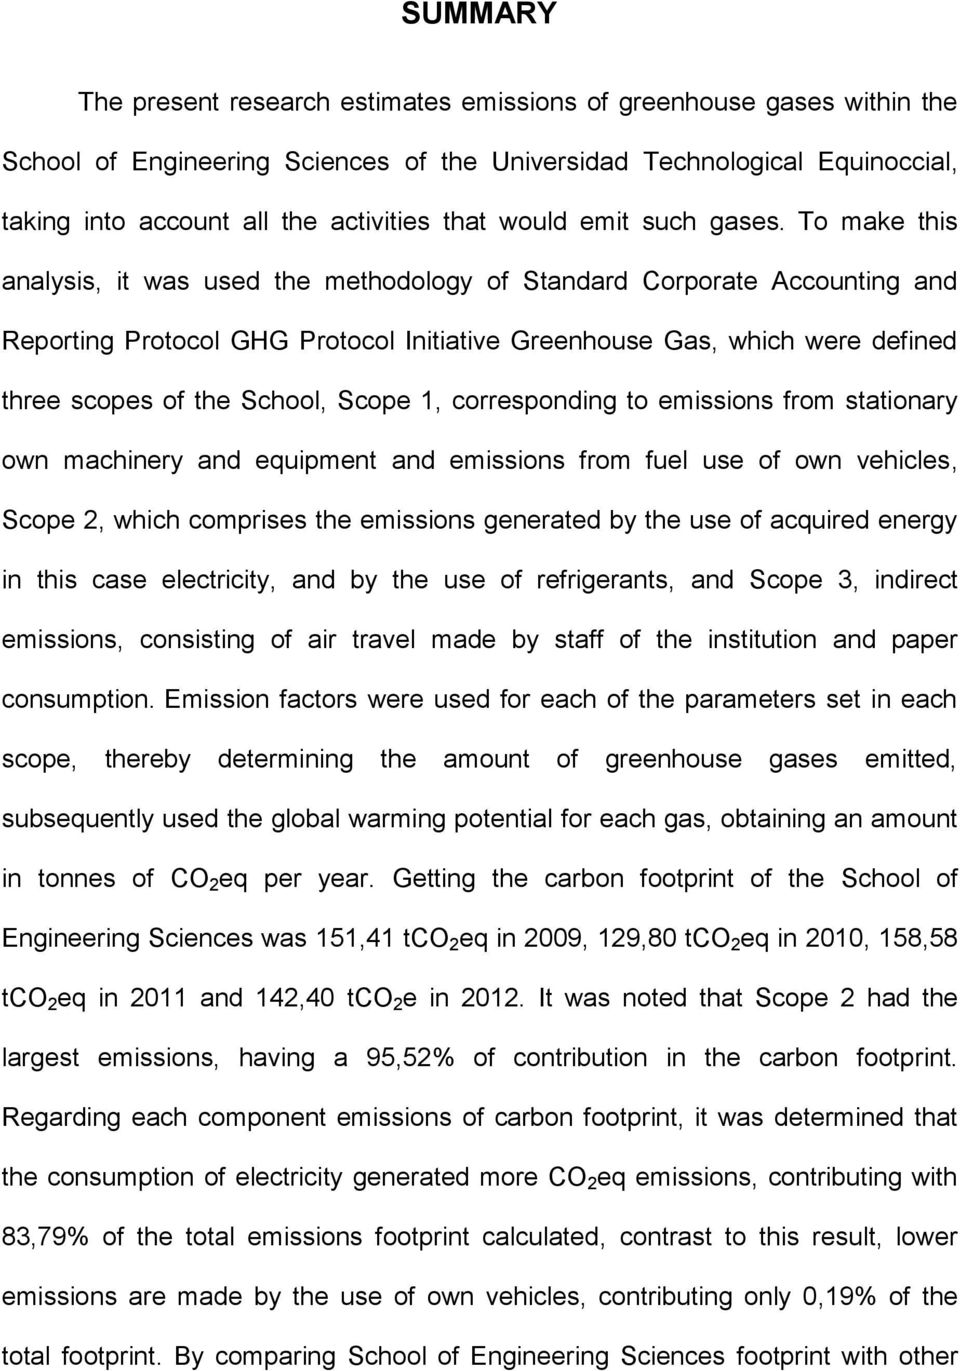 To make this analysis, it was used the methodology of Standard Corporate Accounting and Reporting Protocol GHG Protocol Initiative Greenhouse Gas, which were defined three scopes of the School, Scope